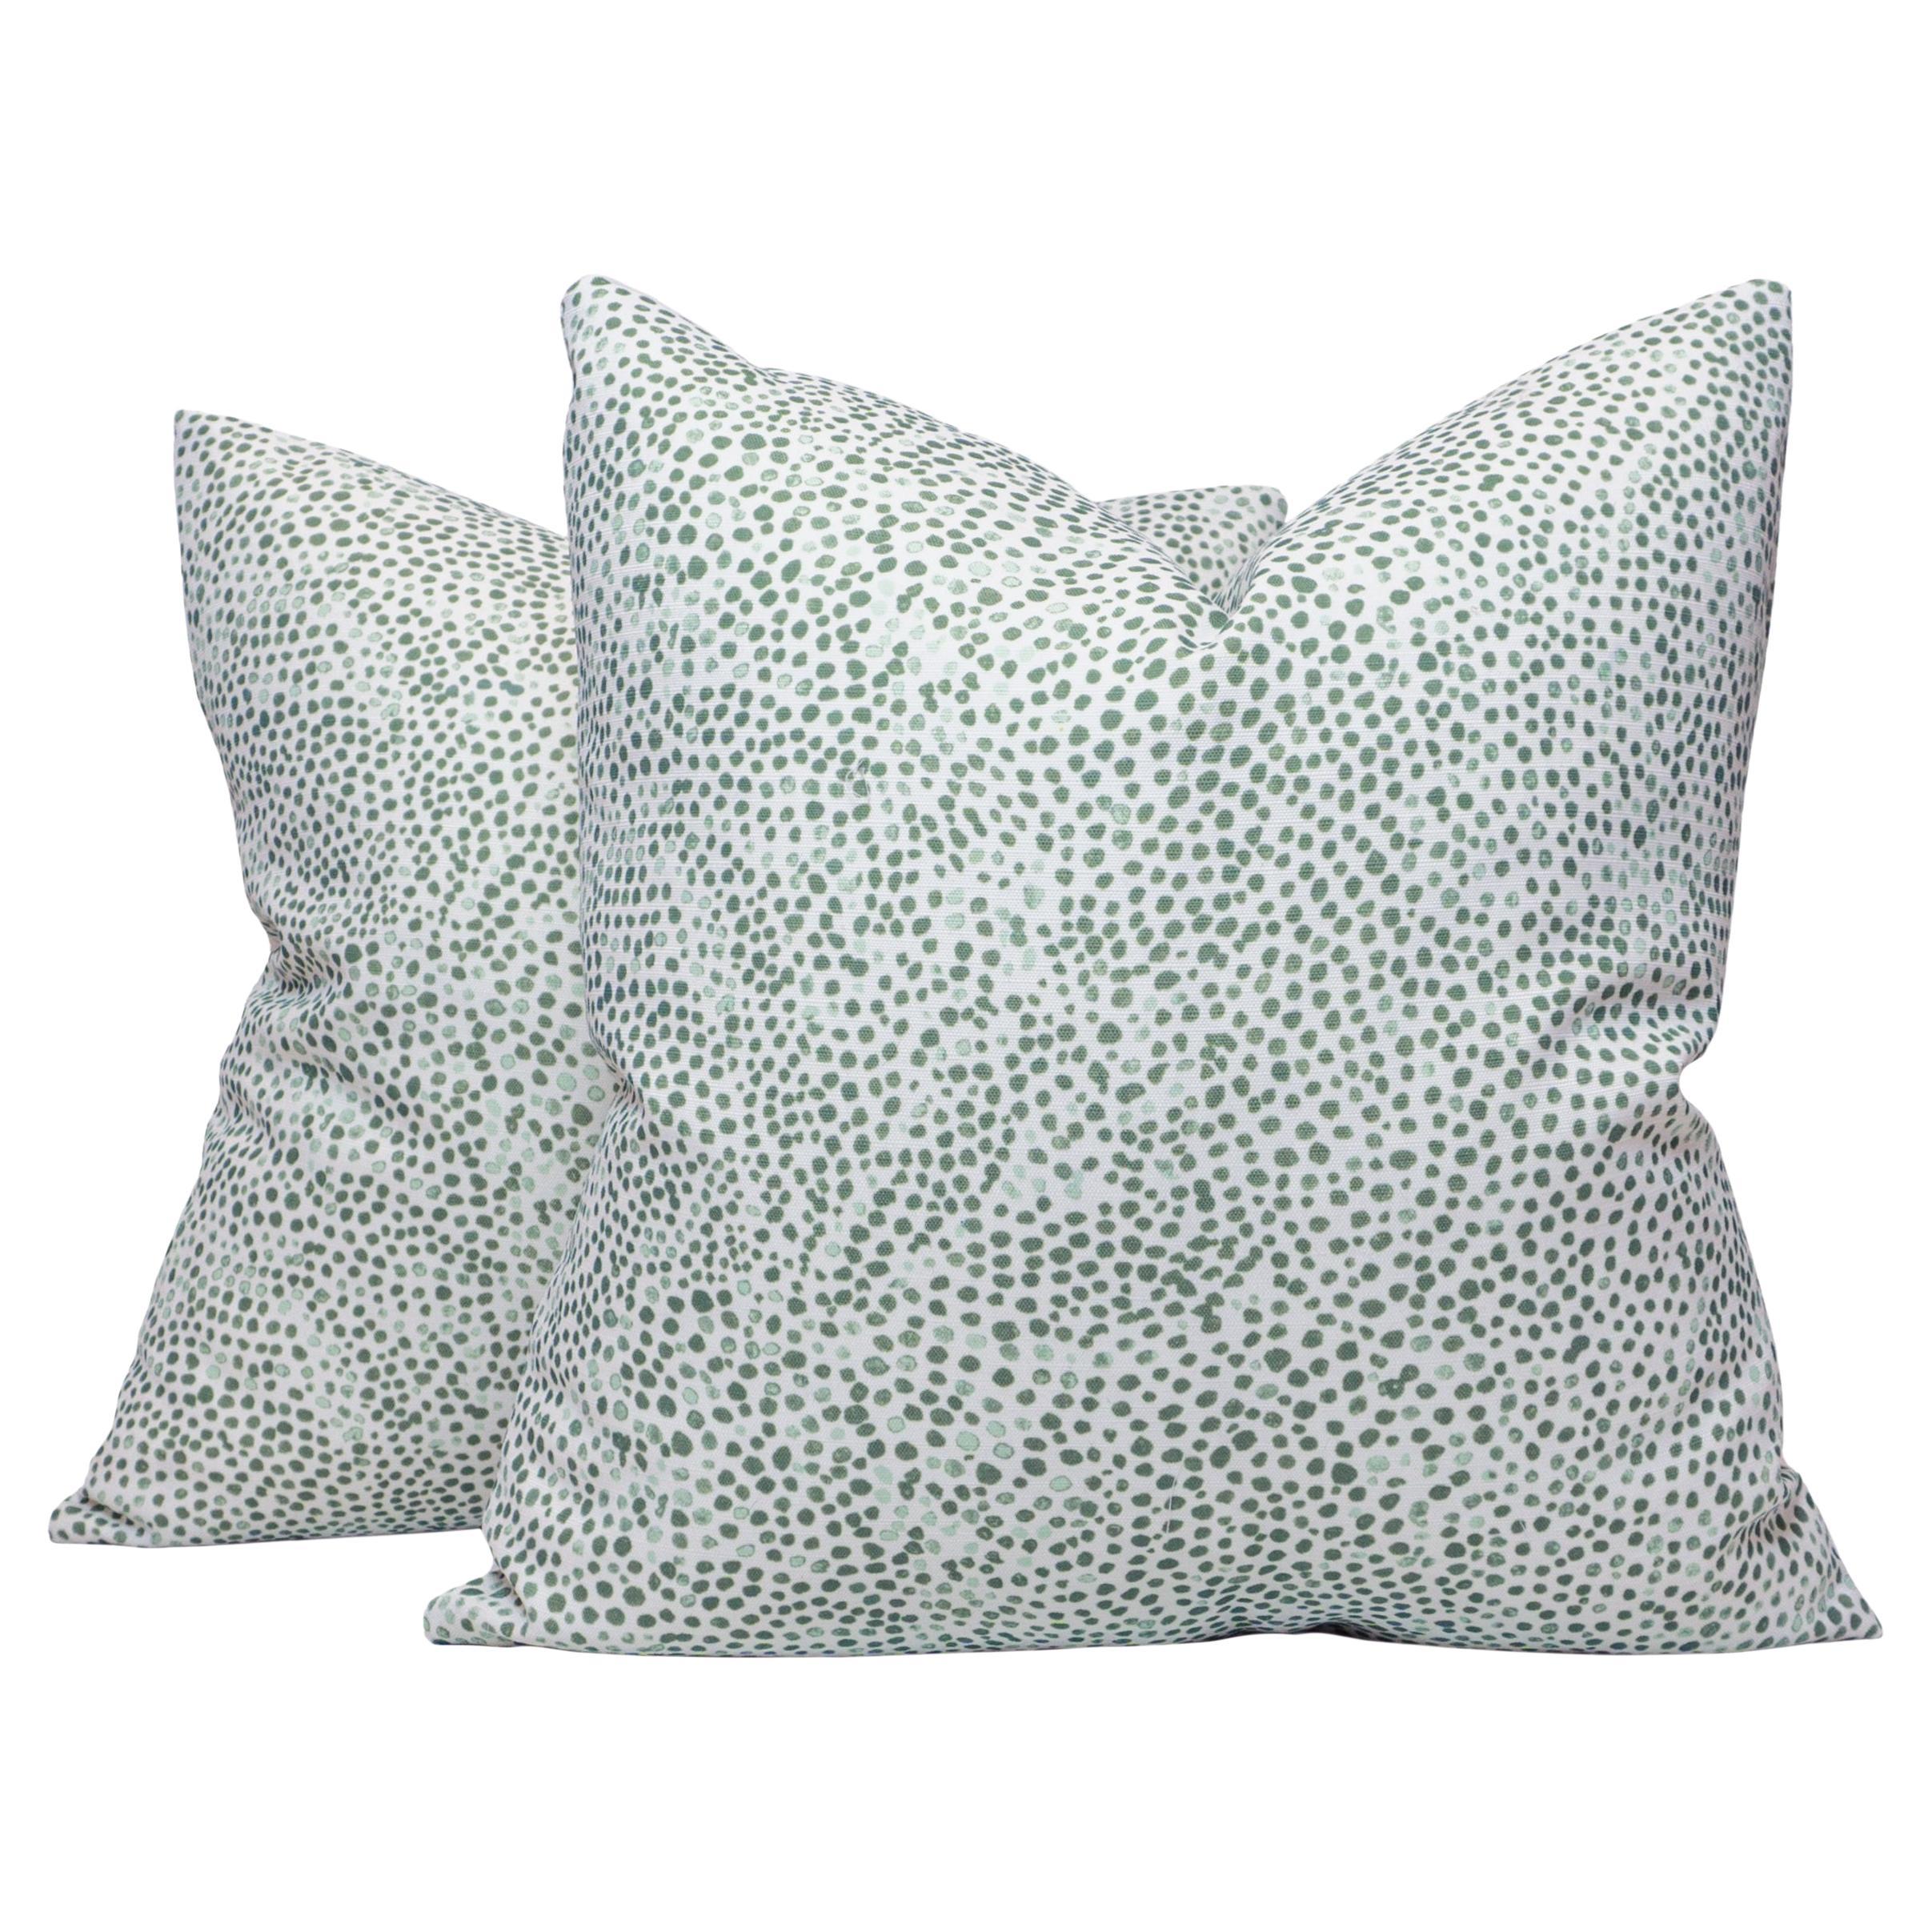 White with Green Dots / Spots Pillows For Sale